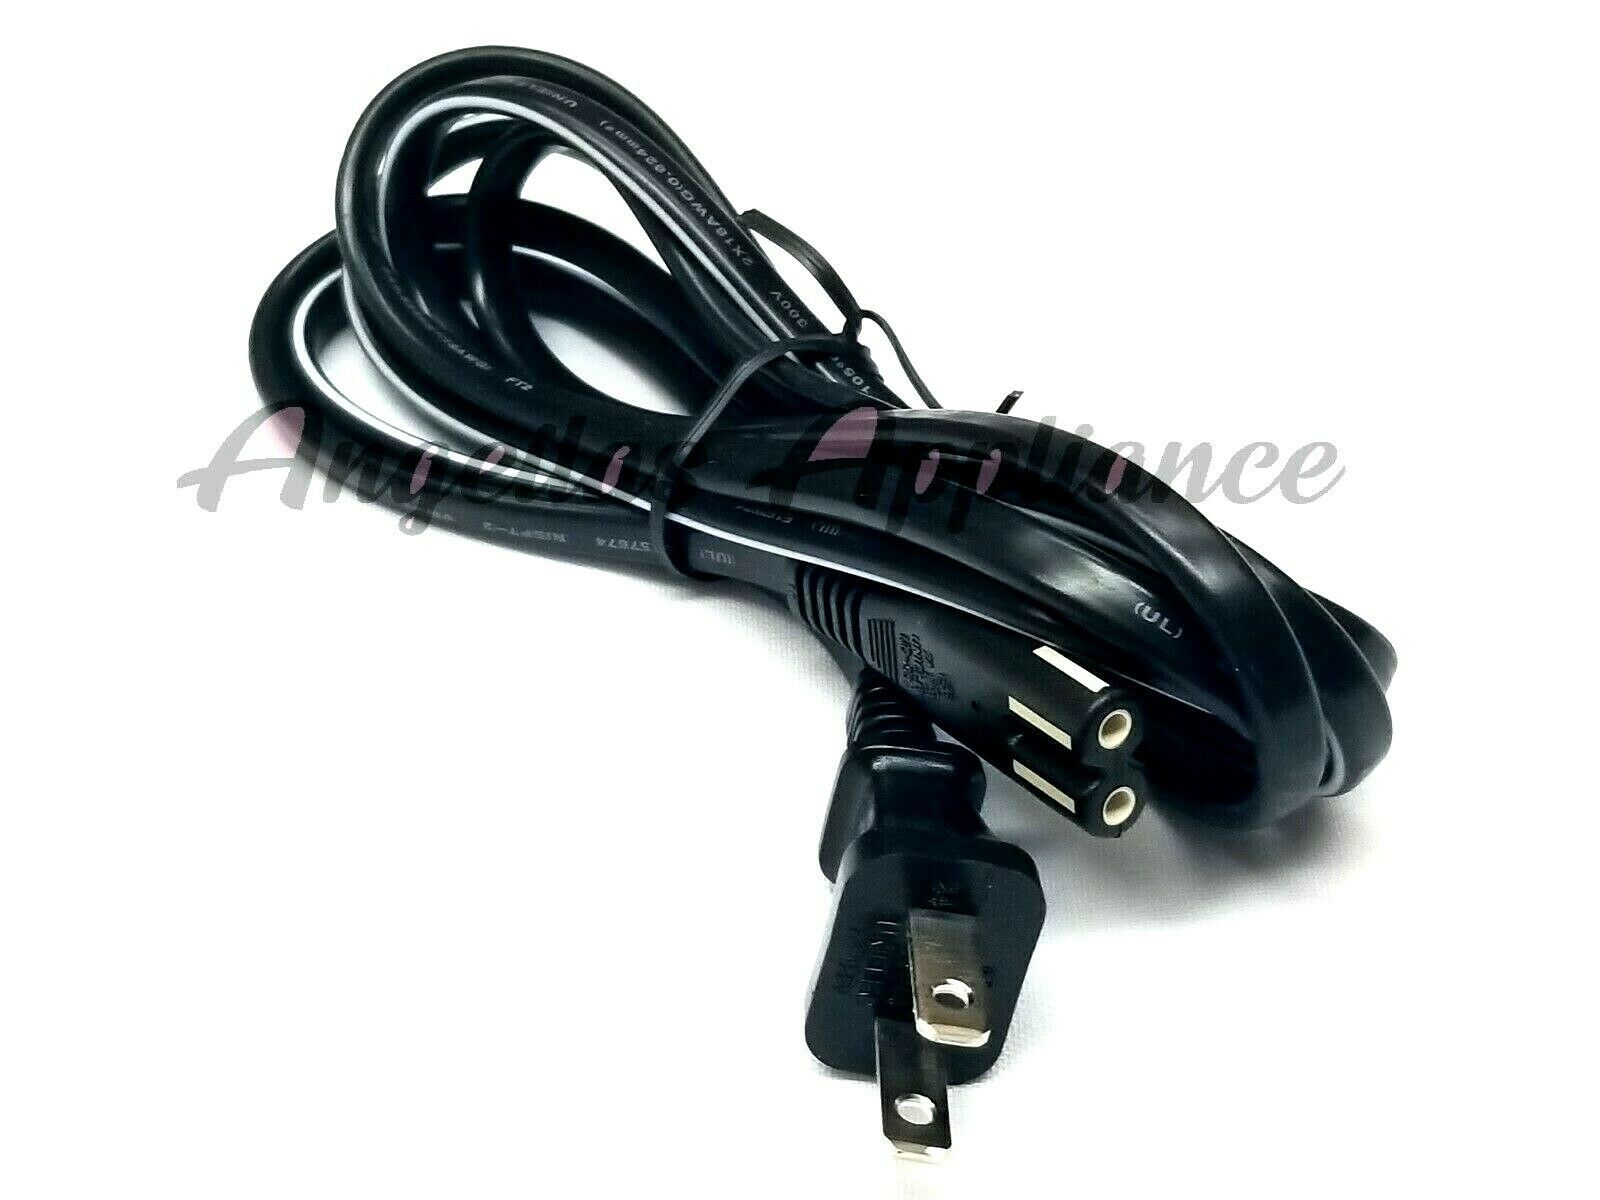 Primary image for Janome Memory Craft Embroidery Sewing Machine Power Cable Cord 6700P MC6700P